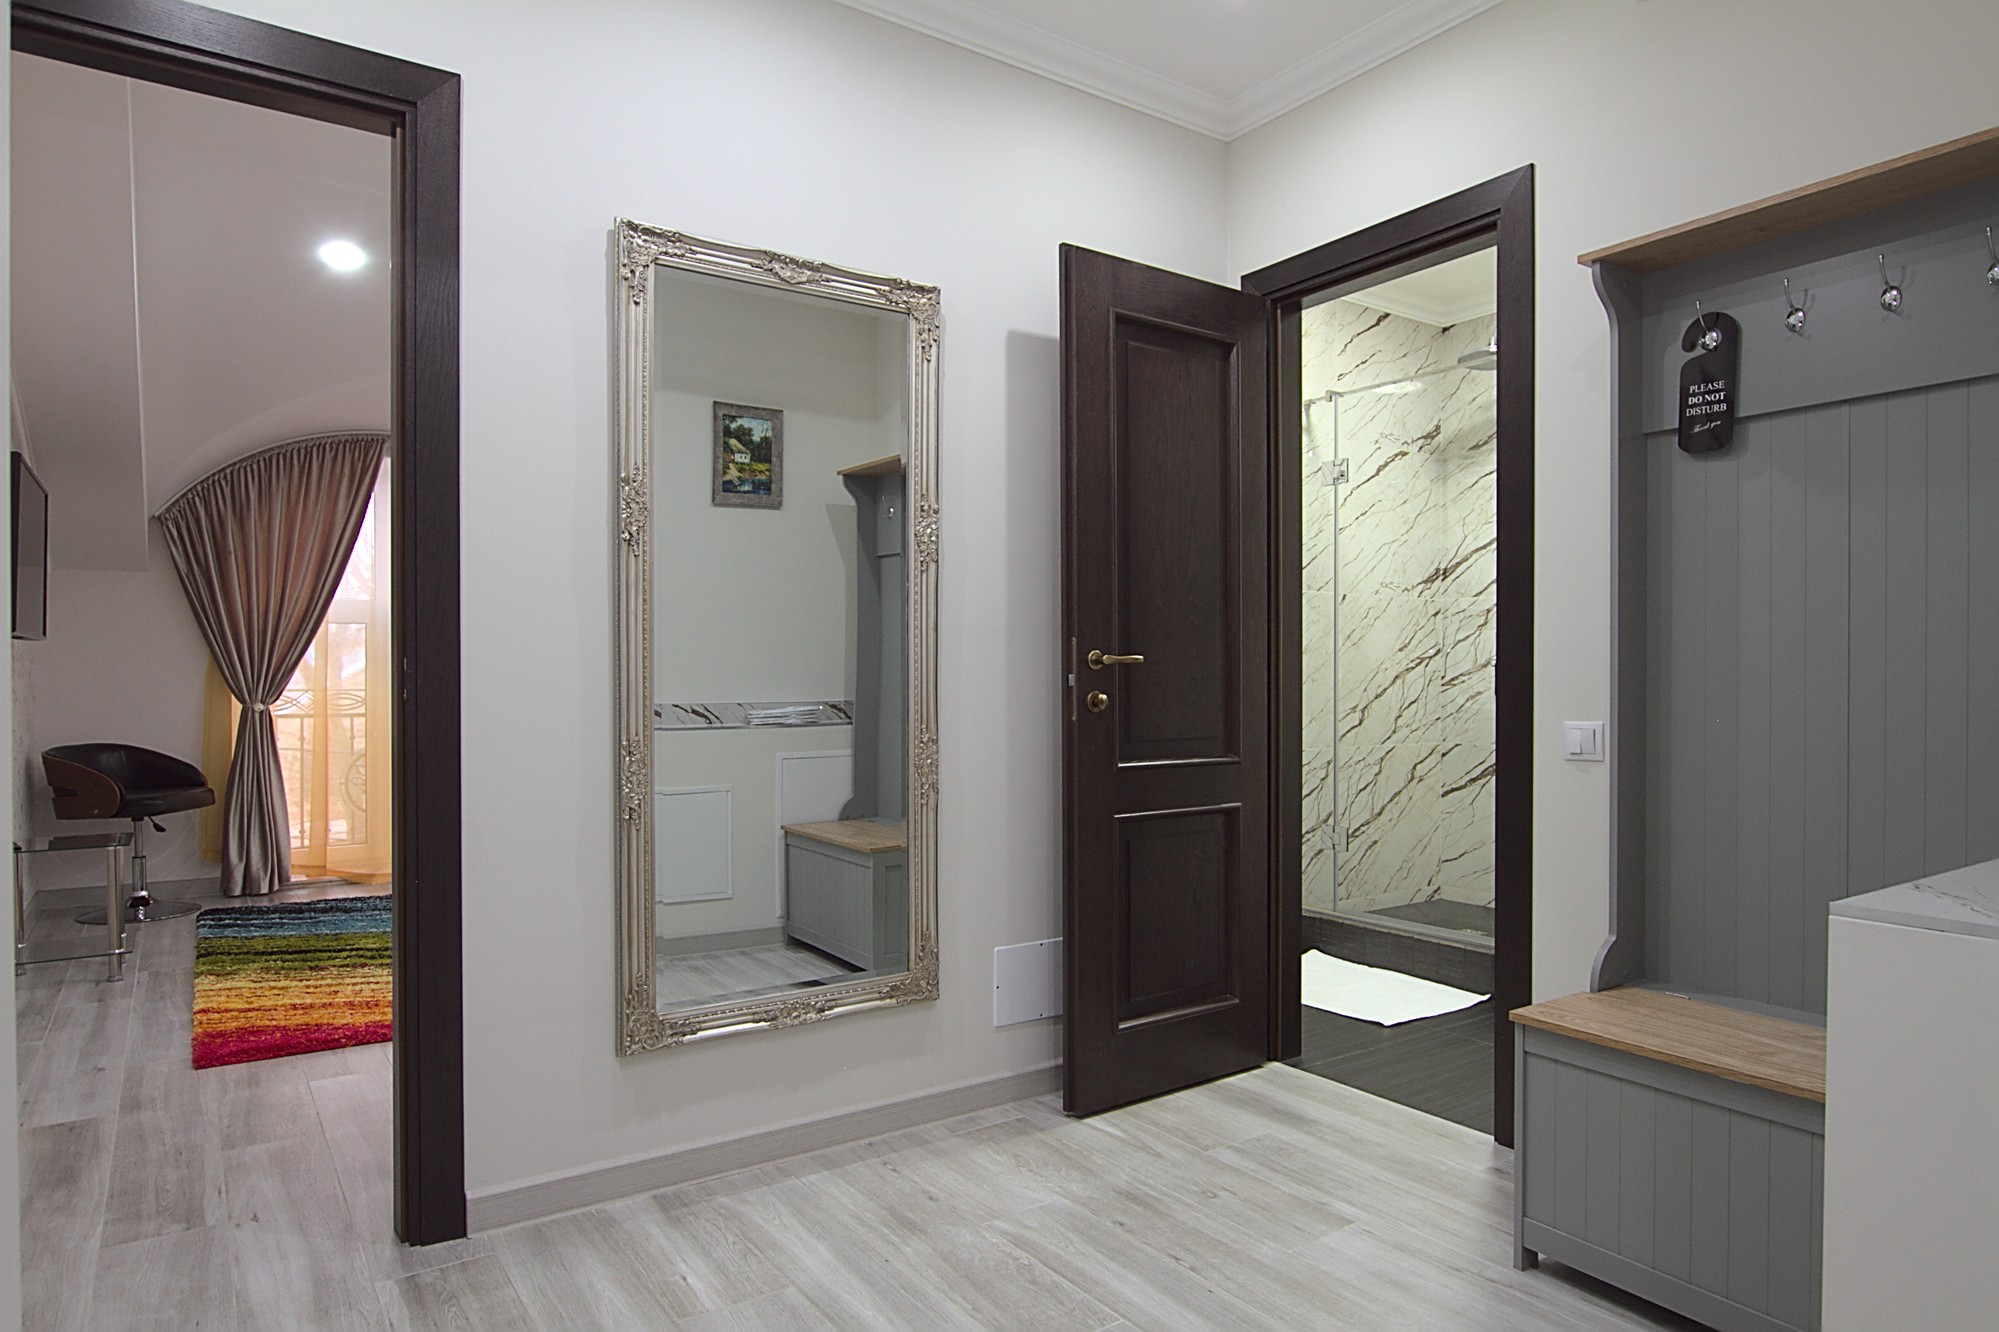 Self Check-in 1 is a 2 rooms apartment for rent in Chisinau, Moldova